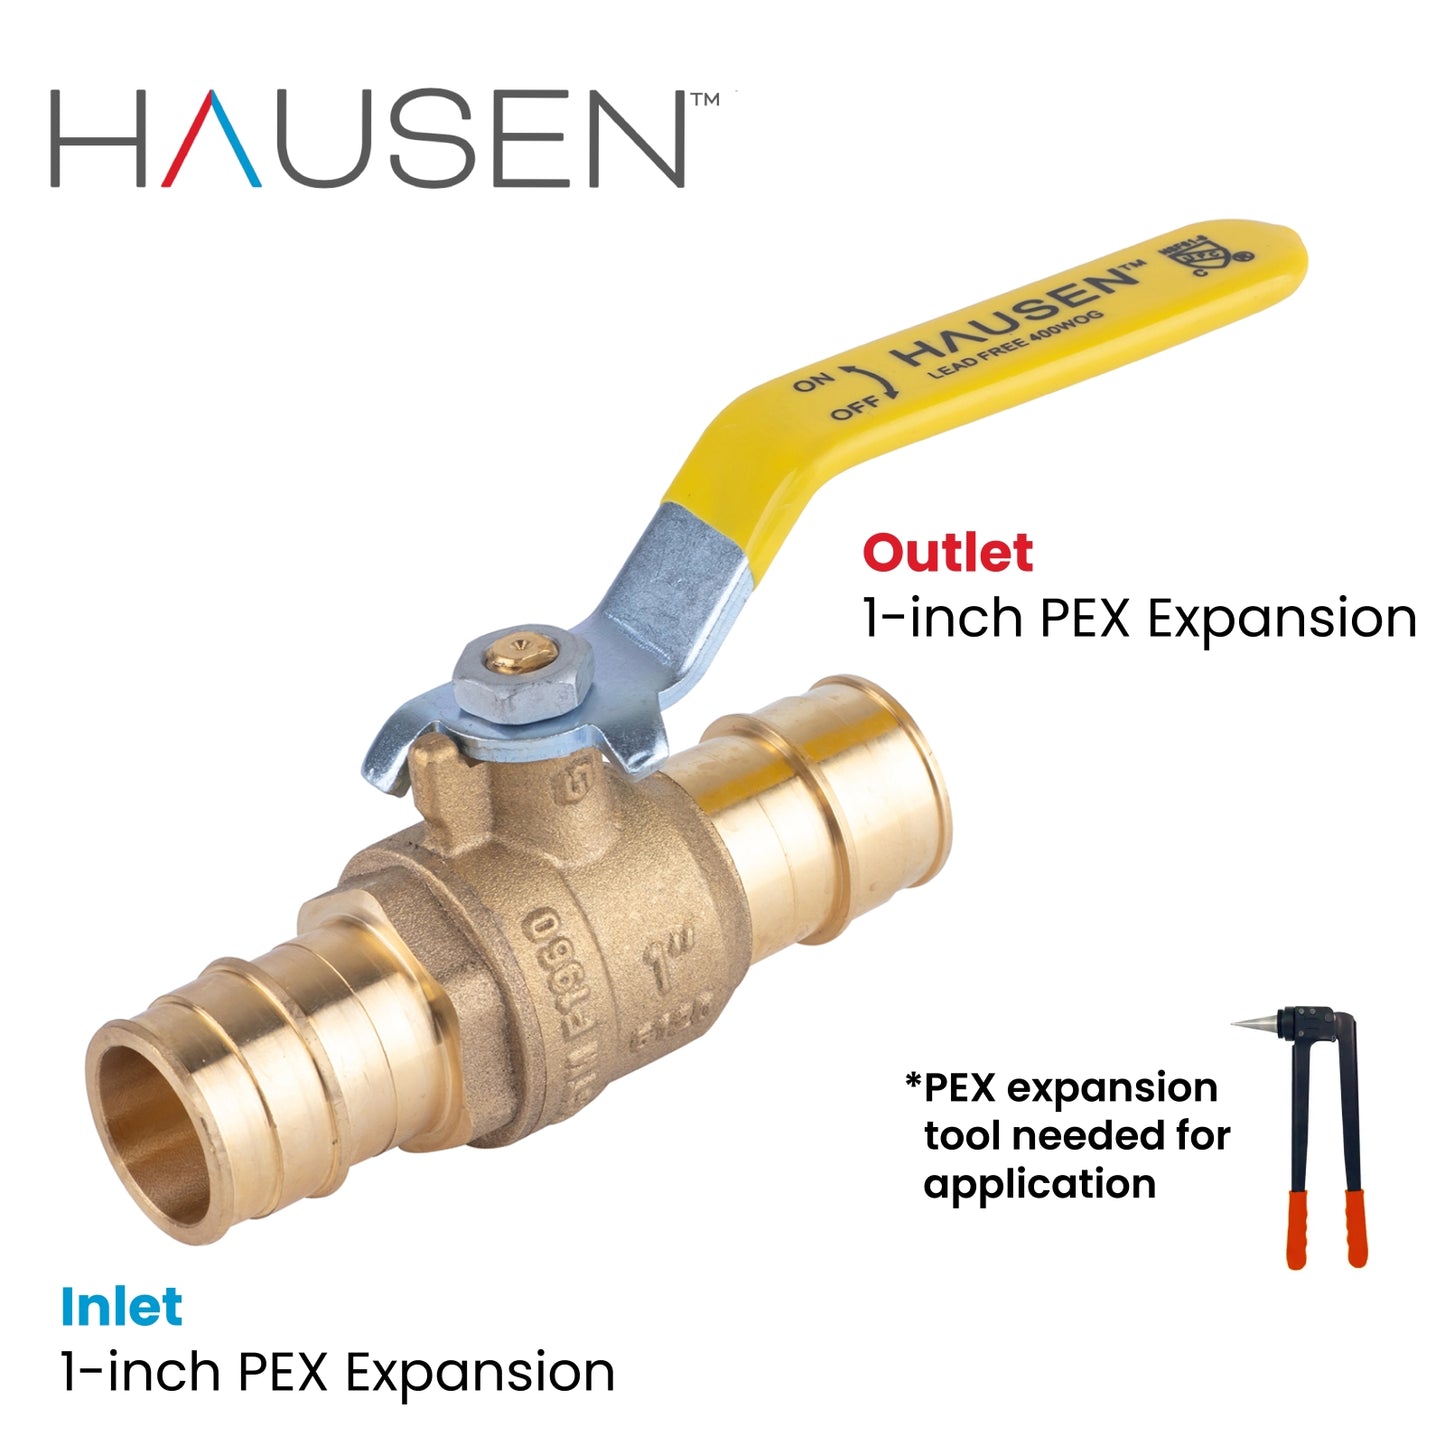 Hausen 1-inch PEX Standard Port Brass Ball Valve with PEX Expansion Connection; Lead Free Forged Brass; Blowout Resistant Stem; For Use in Potable Water, Oil and Gas Distribution Systems, 10-Pack